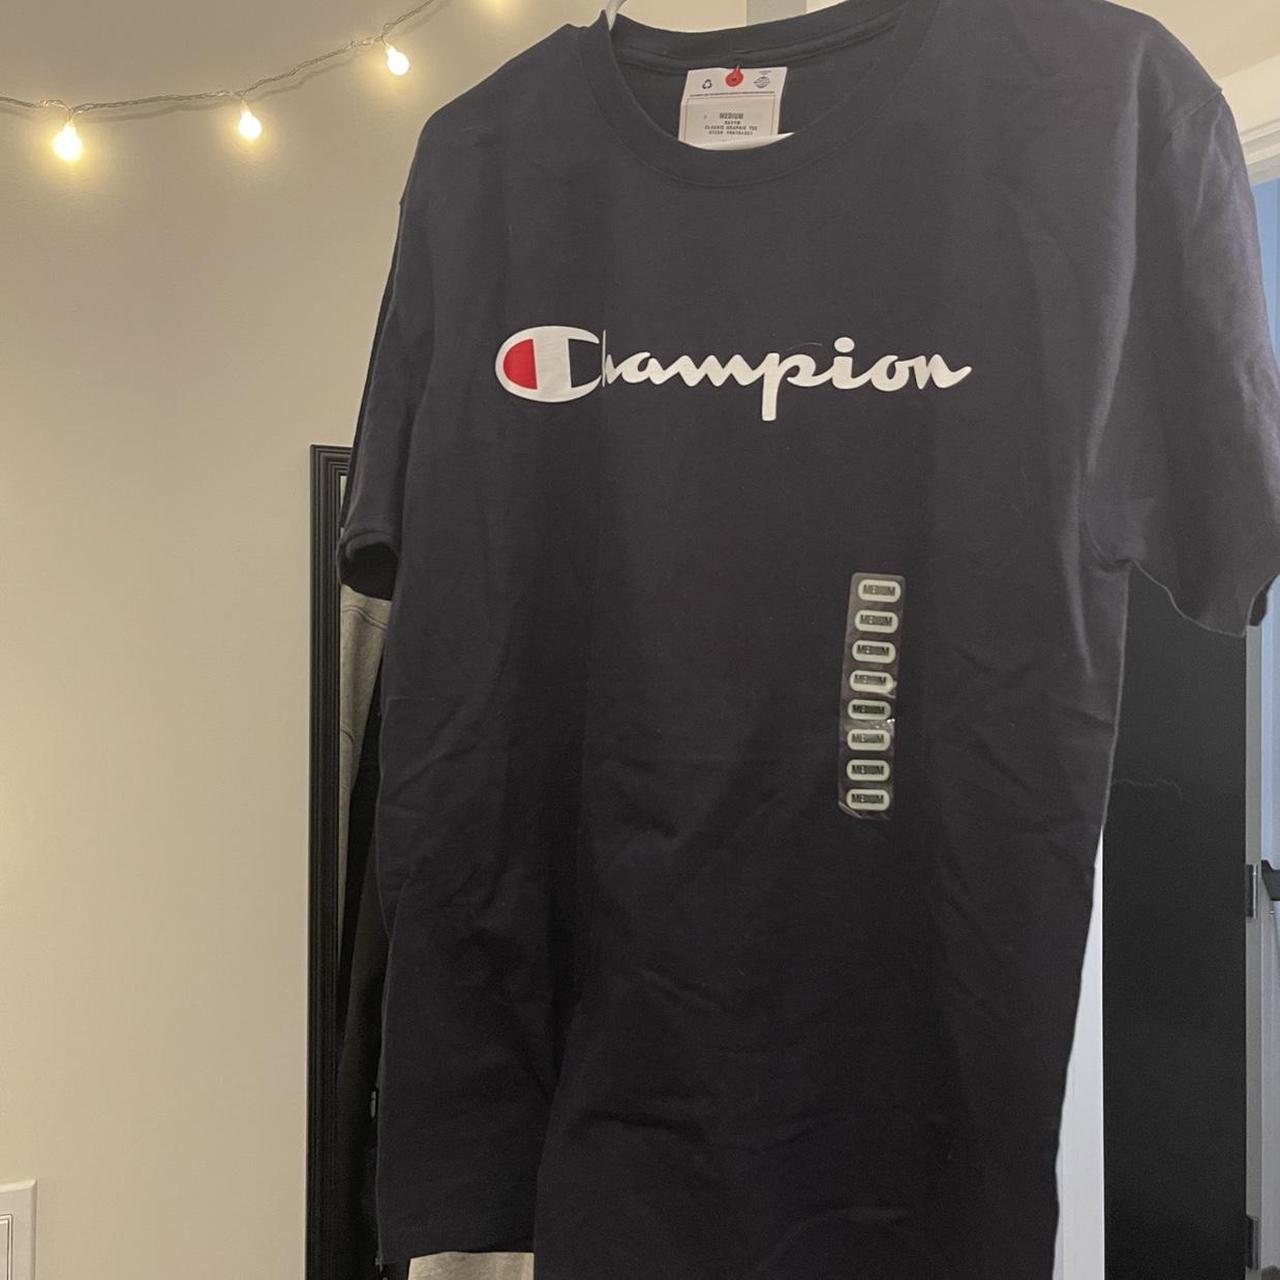 NWT Navy blue Champion logo shirt. This is a size M... - Depop